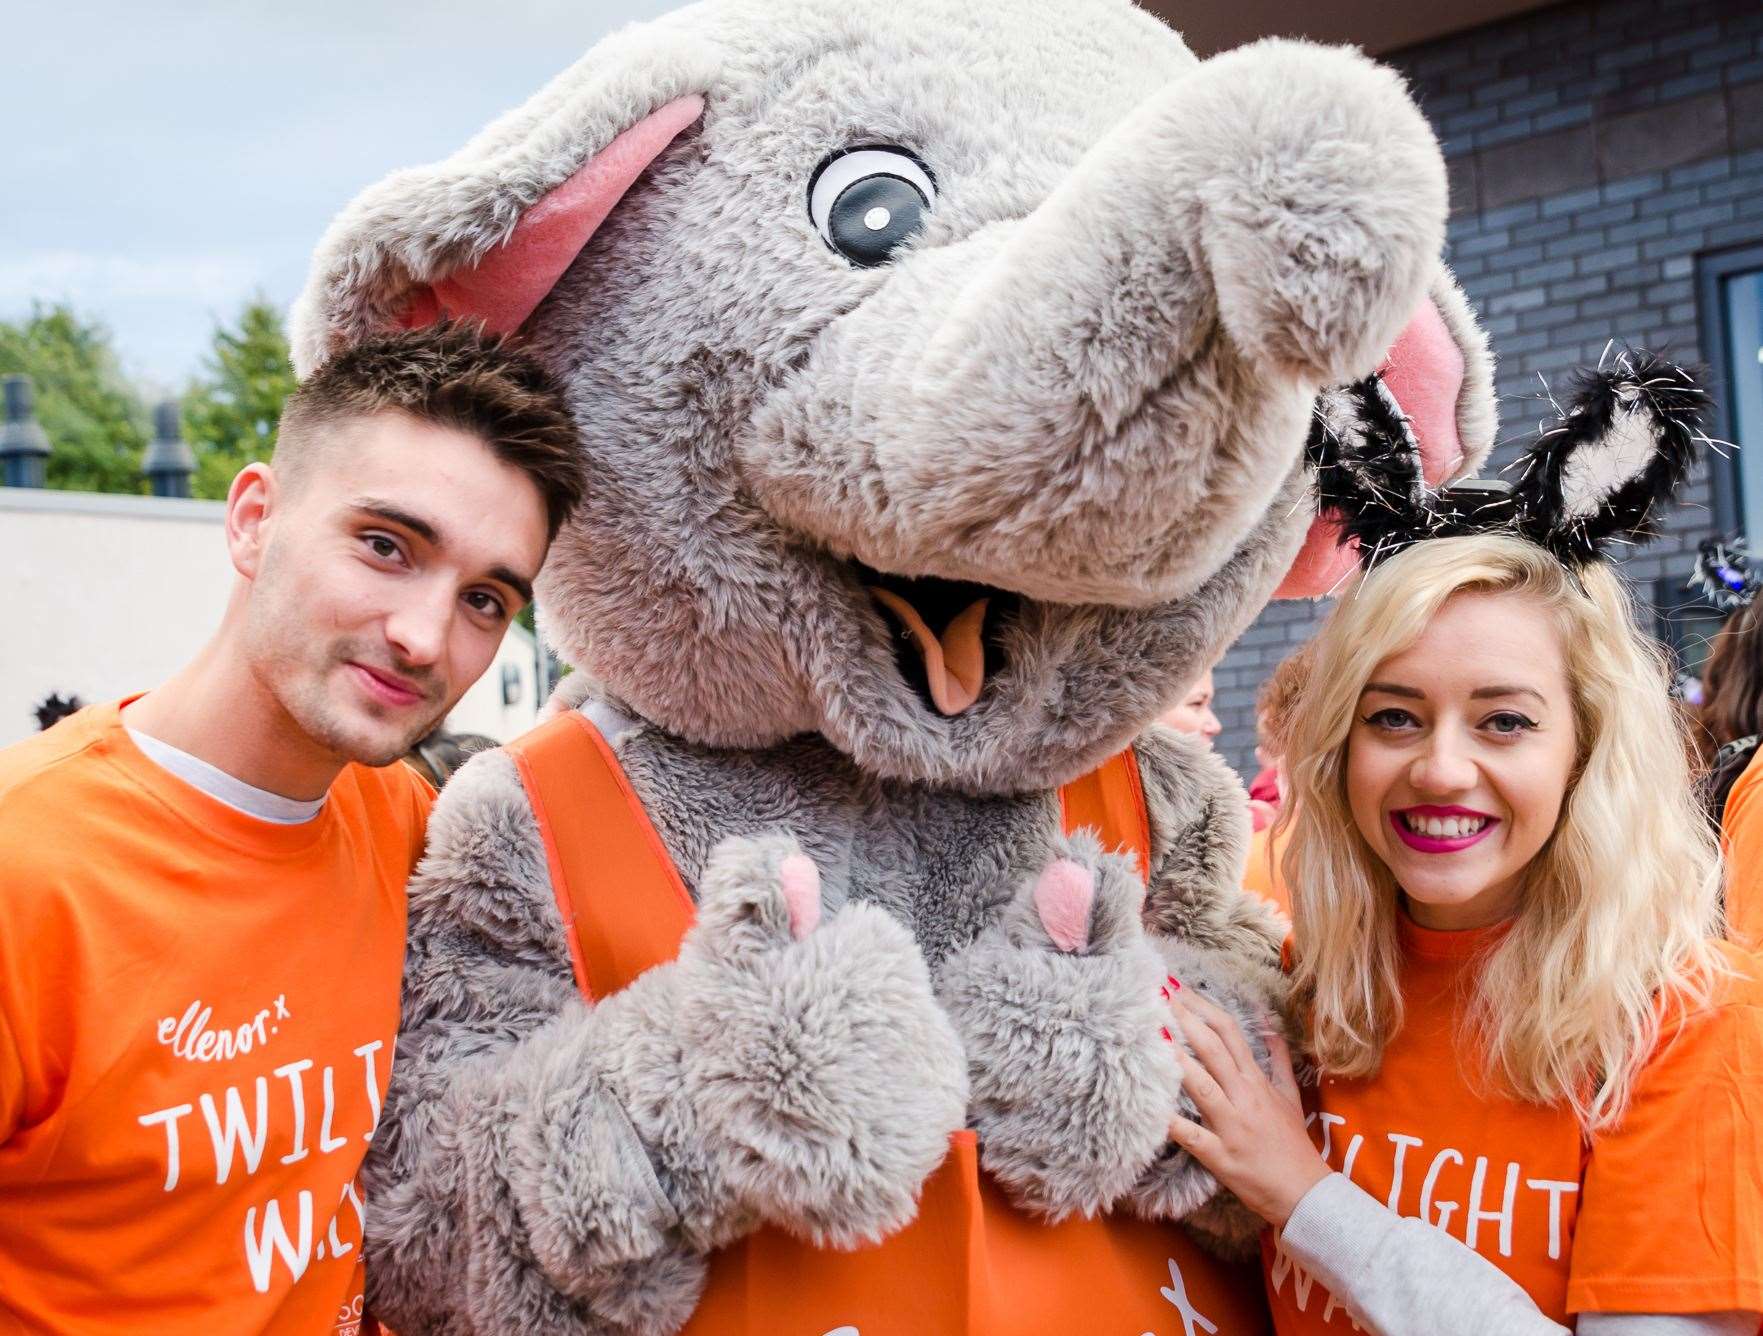 Tom and his wife Kelsey Hardwick previously took part in a twilight walk supporting the Gravesend charity